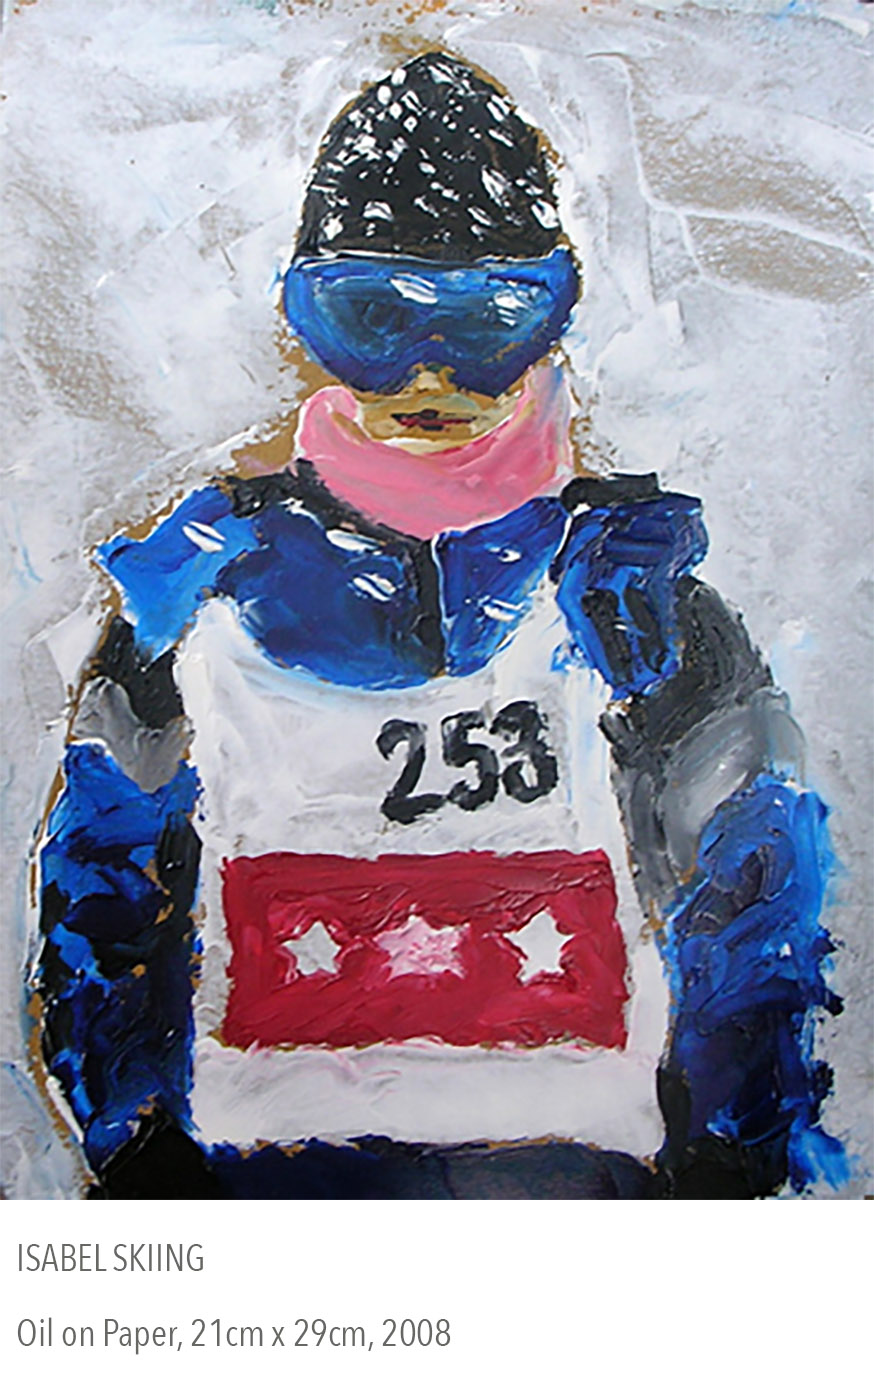 2008 oil painting called Isabel Skiing